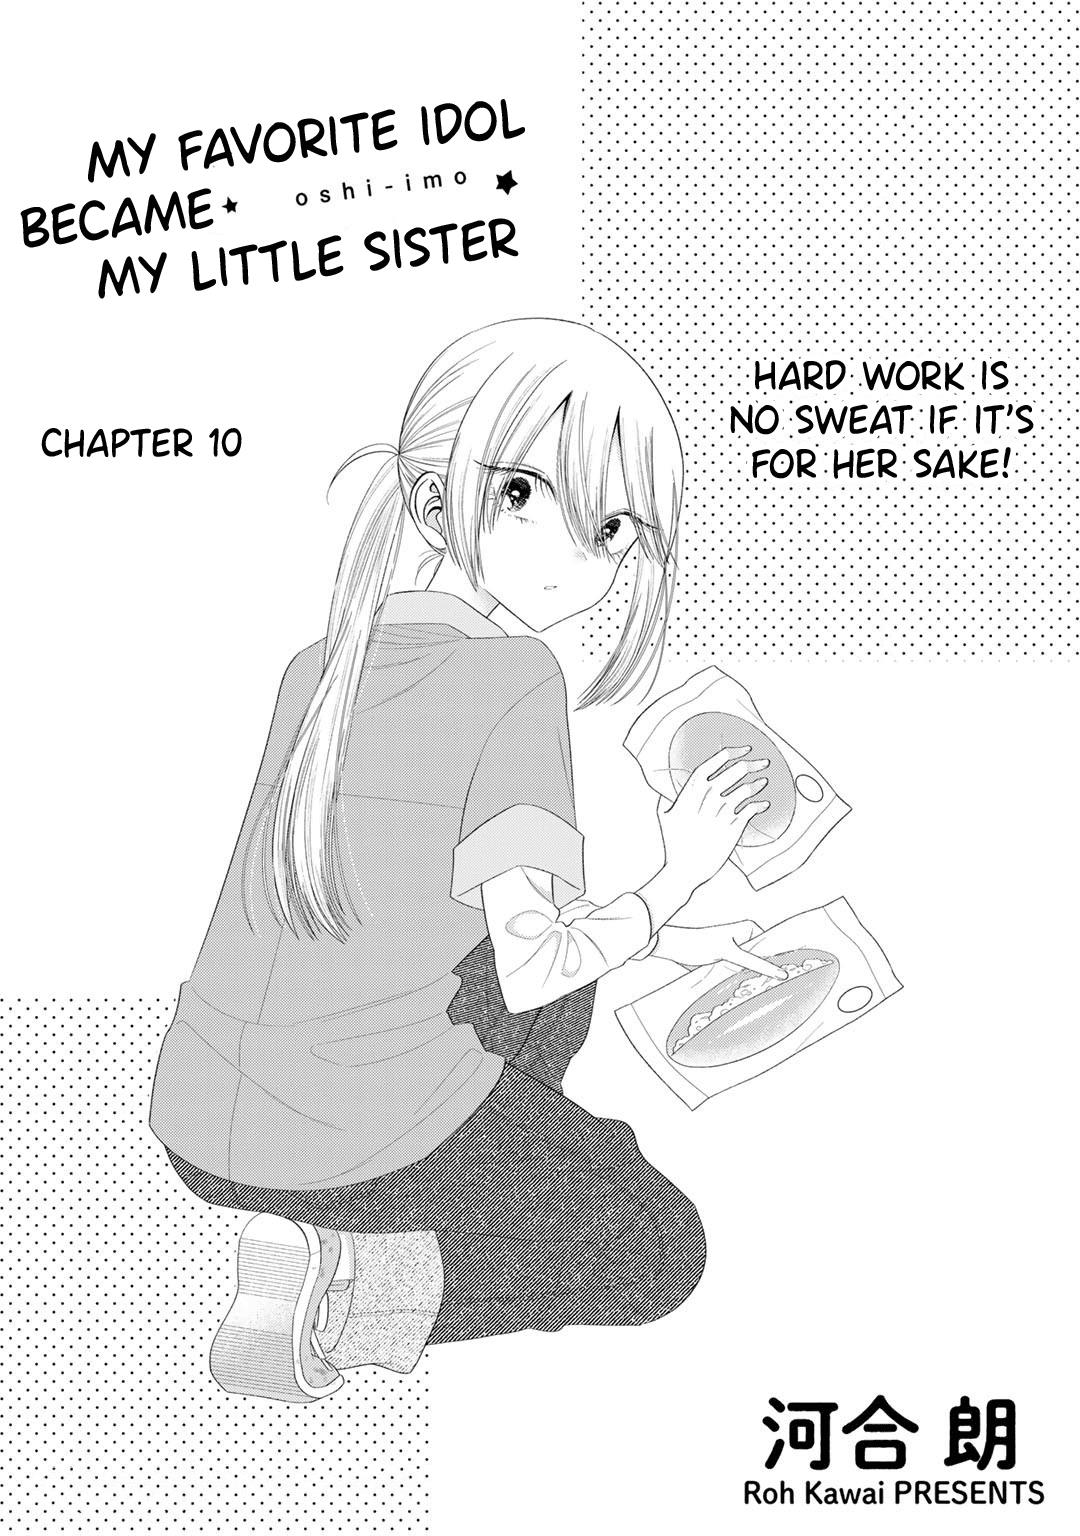 My Favorite Idol Became My Little Sister - Page 1